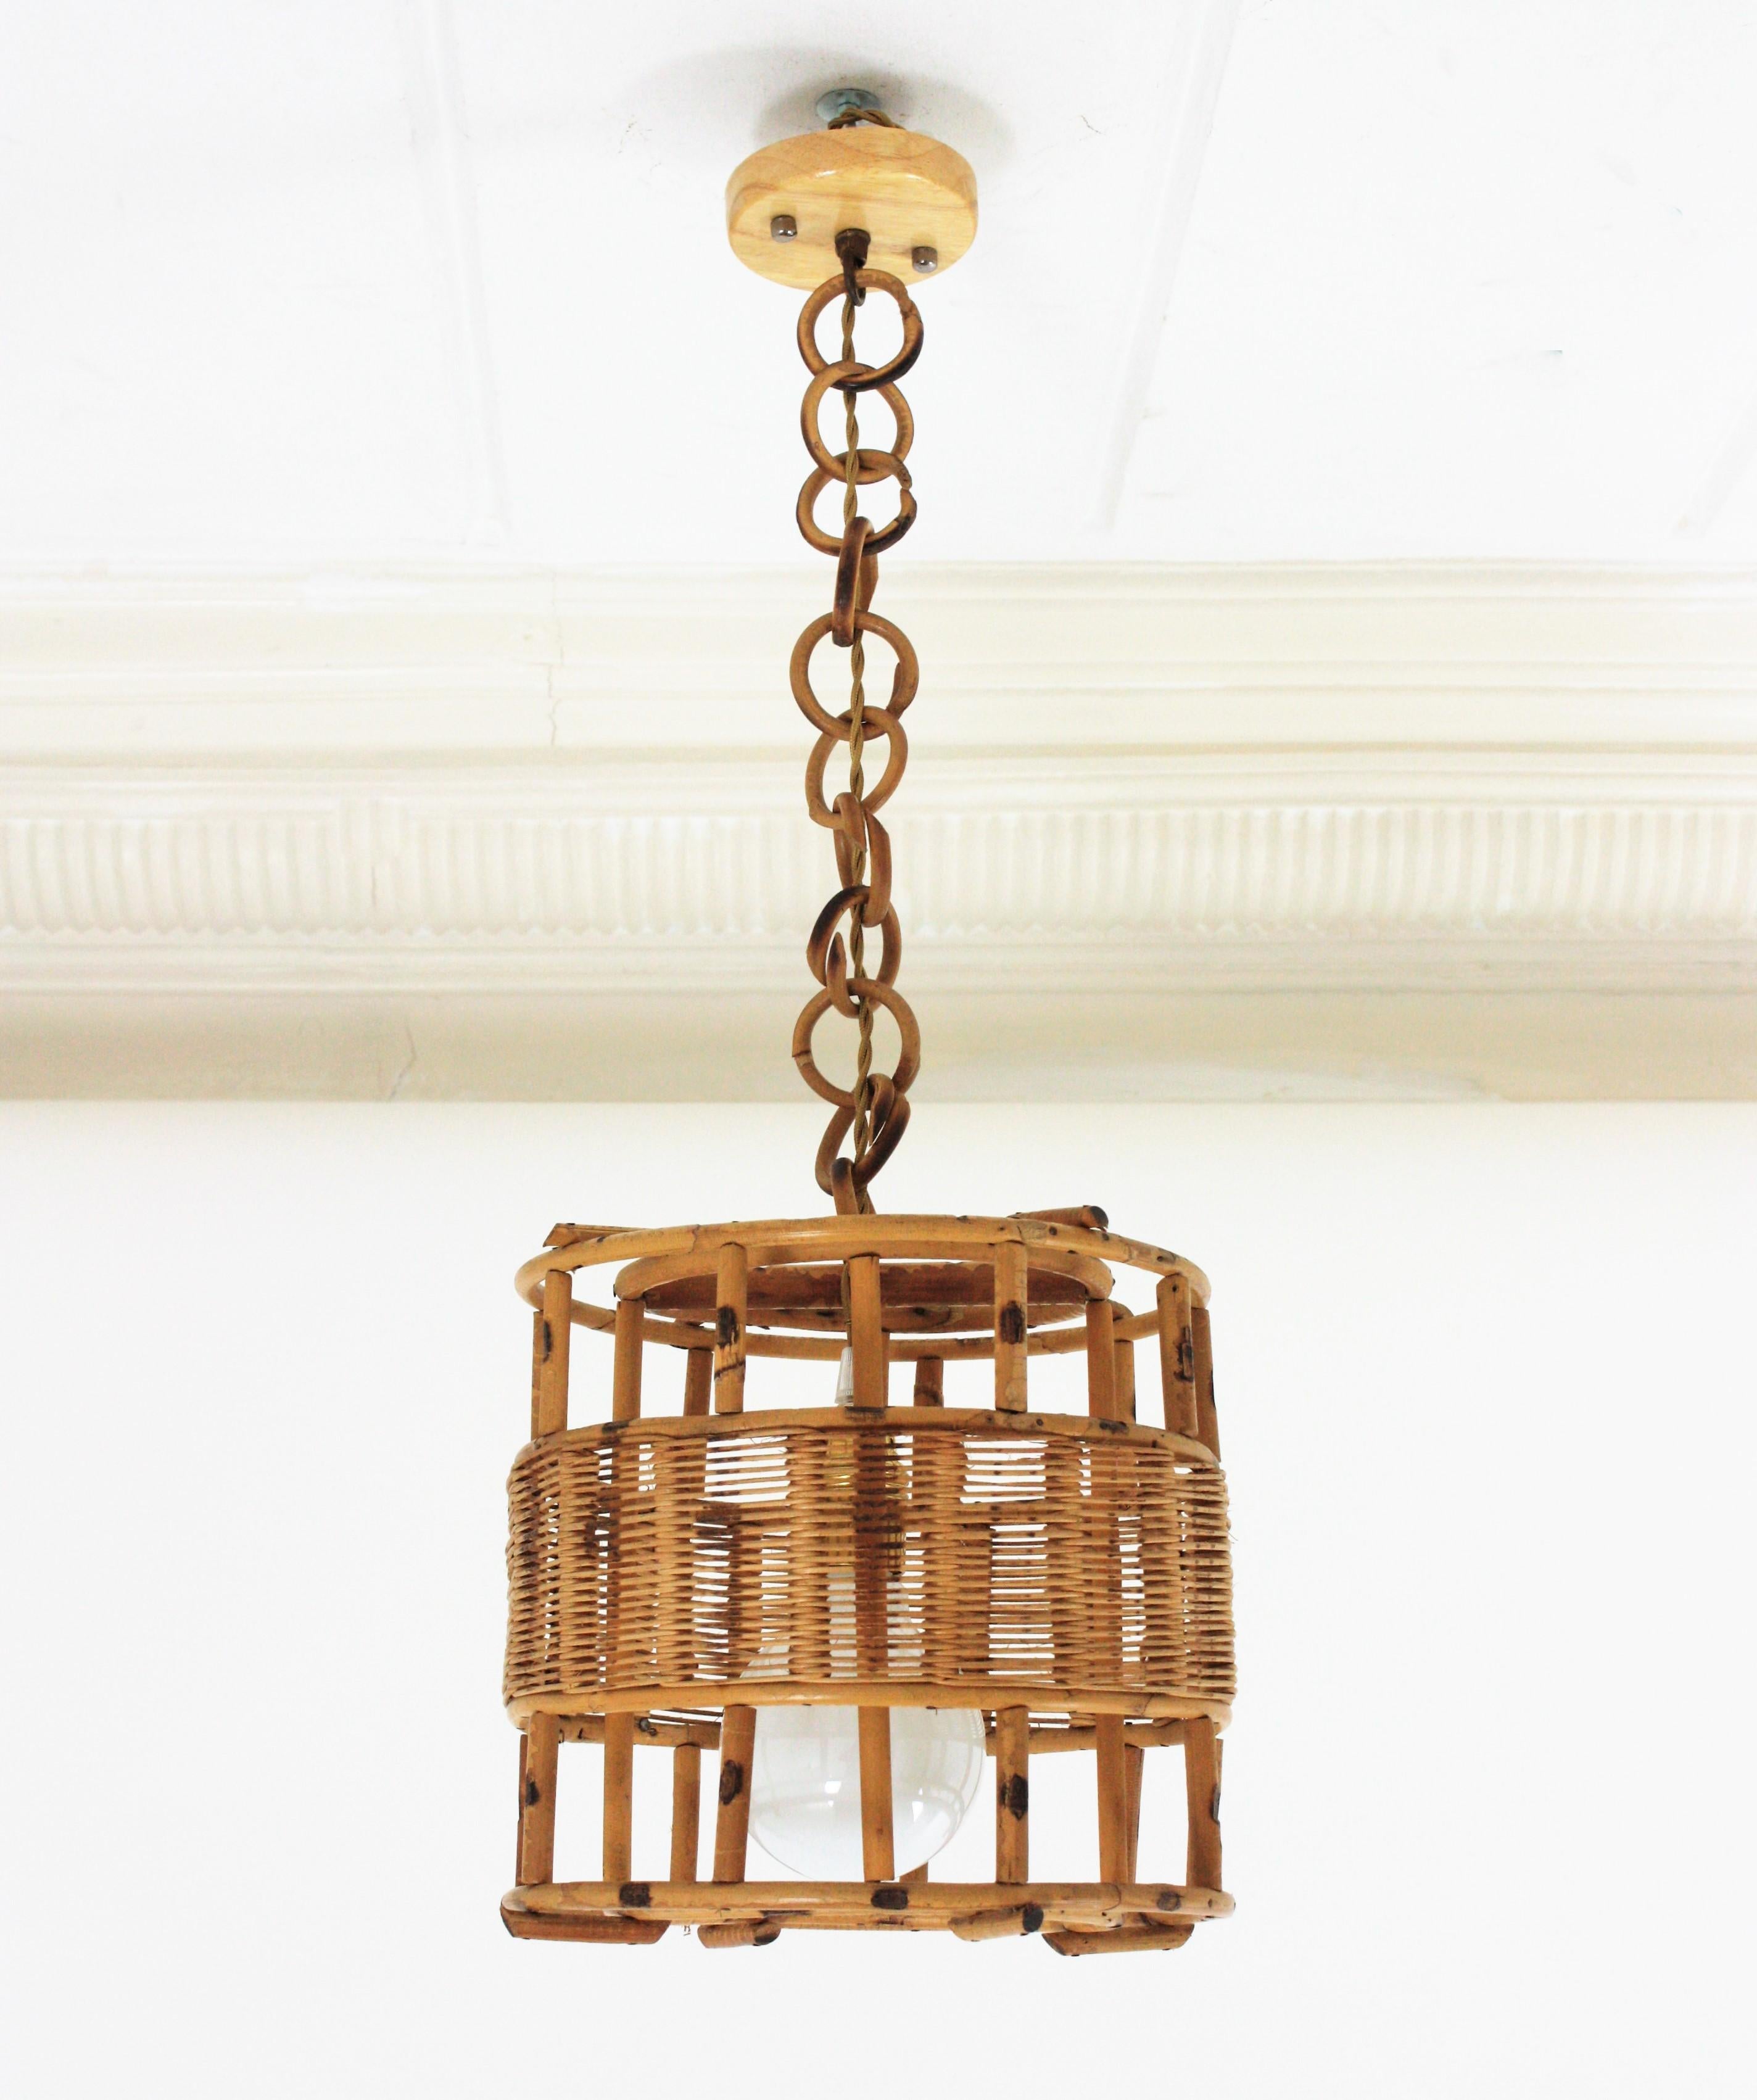 Hand-Crafted French Rattan Cylinder Pendant Light or Lantern, 1950s For Sale